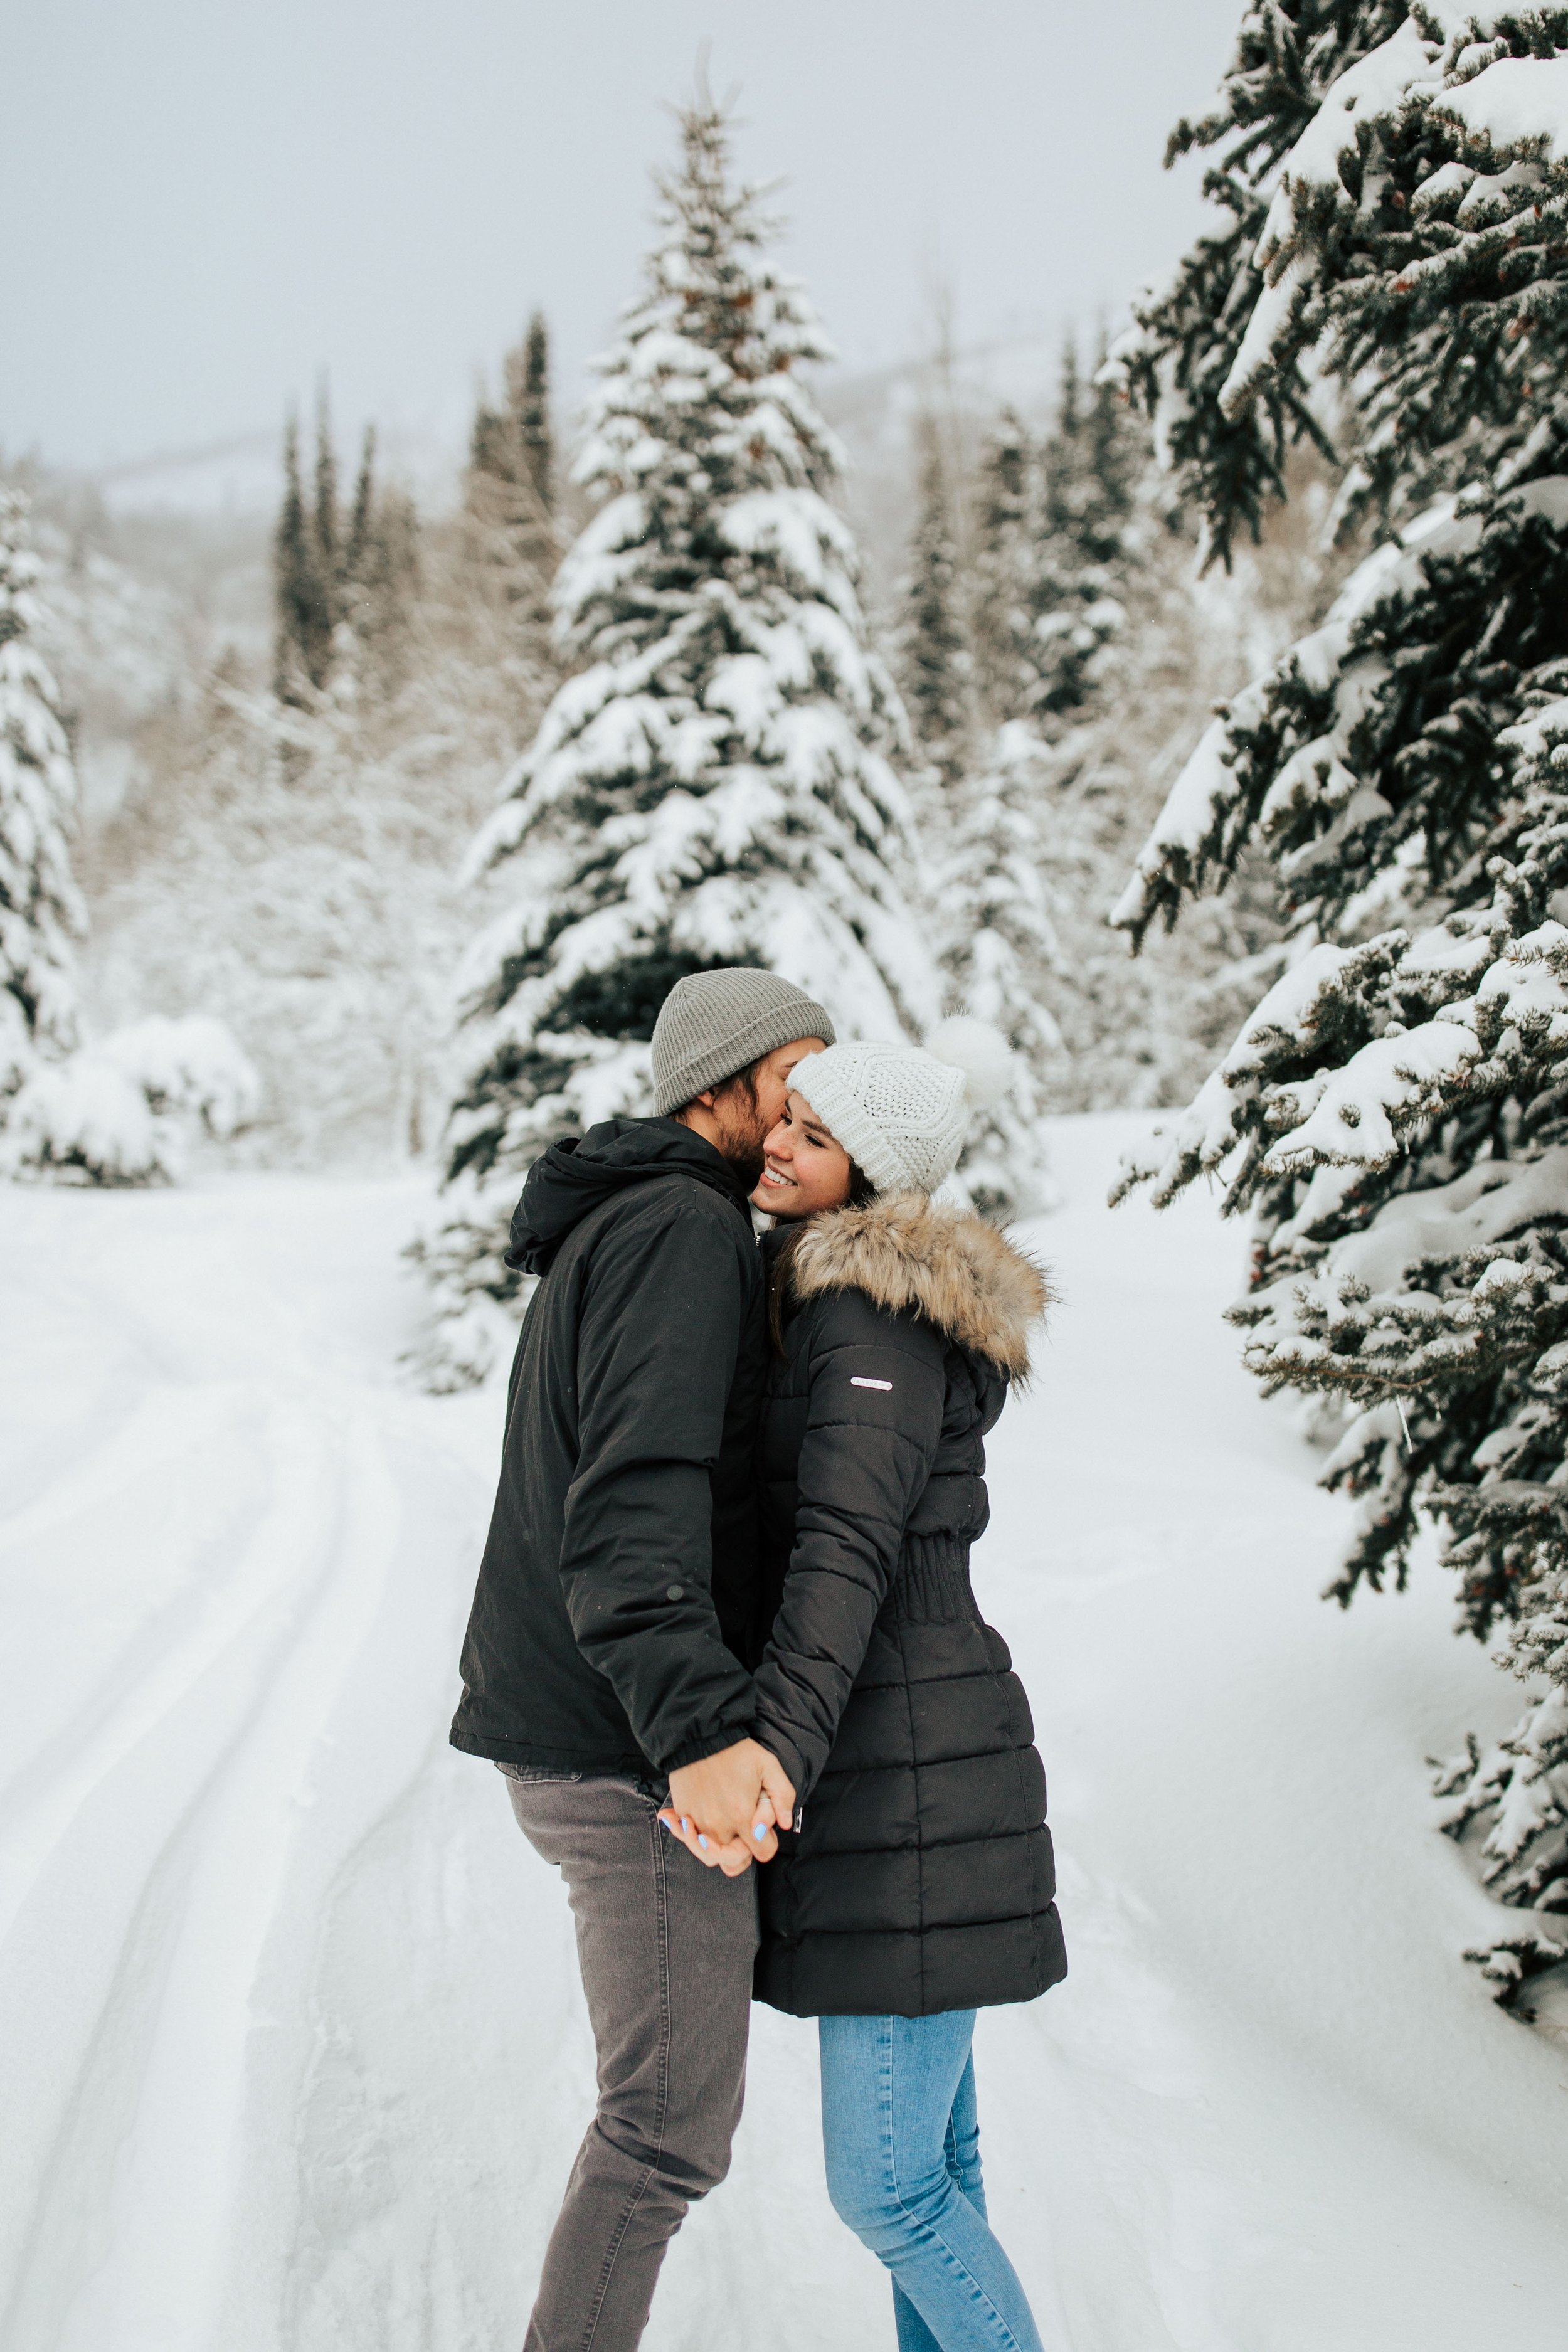  Winter photoshoot outfit inspo coats and beanies couples session couple playing in the snow winter engagement session #winteroutfitinspo #outfitinspo #winteroutfits #winterphotoshoot  